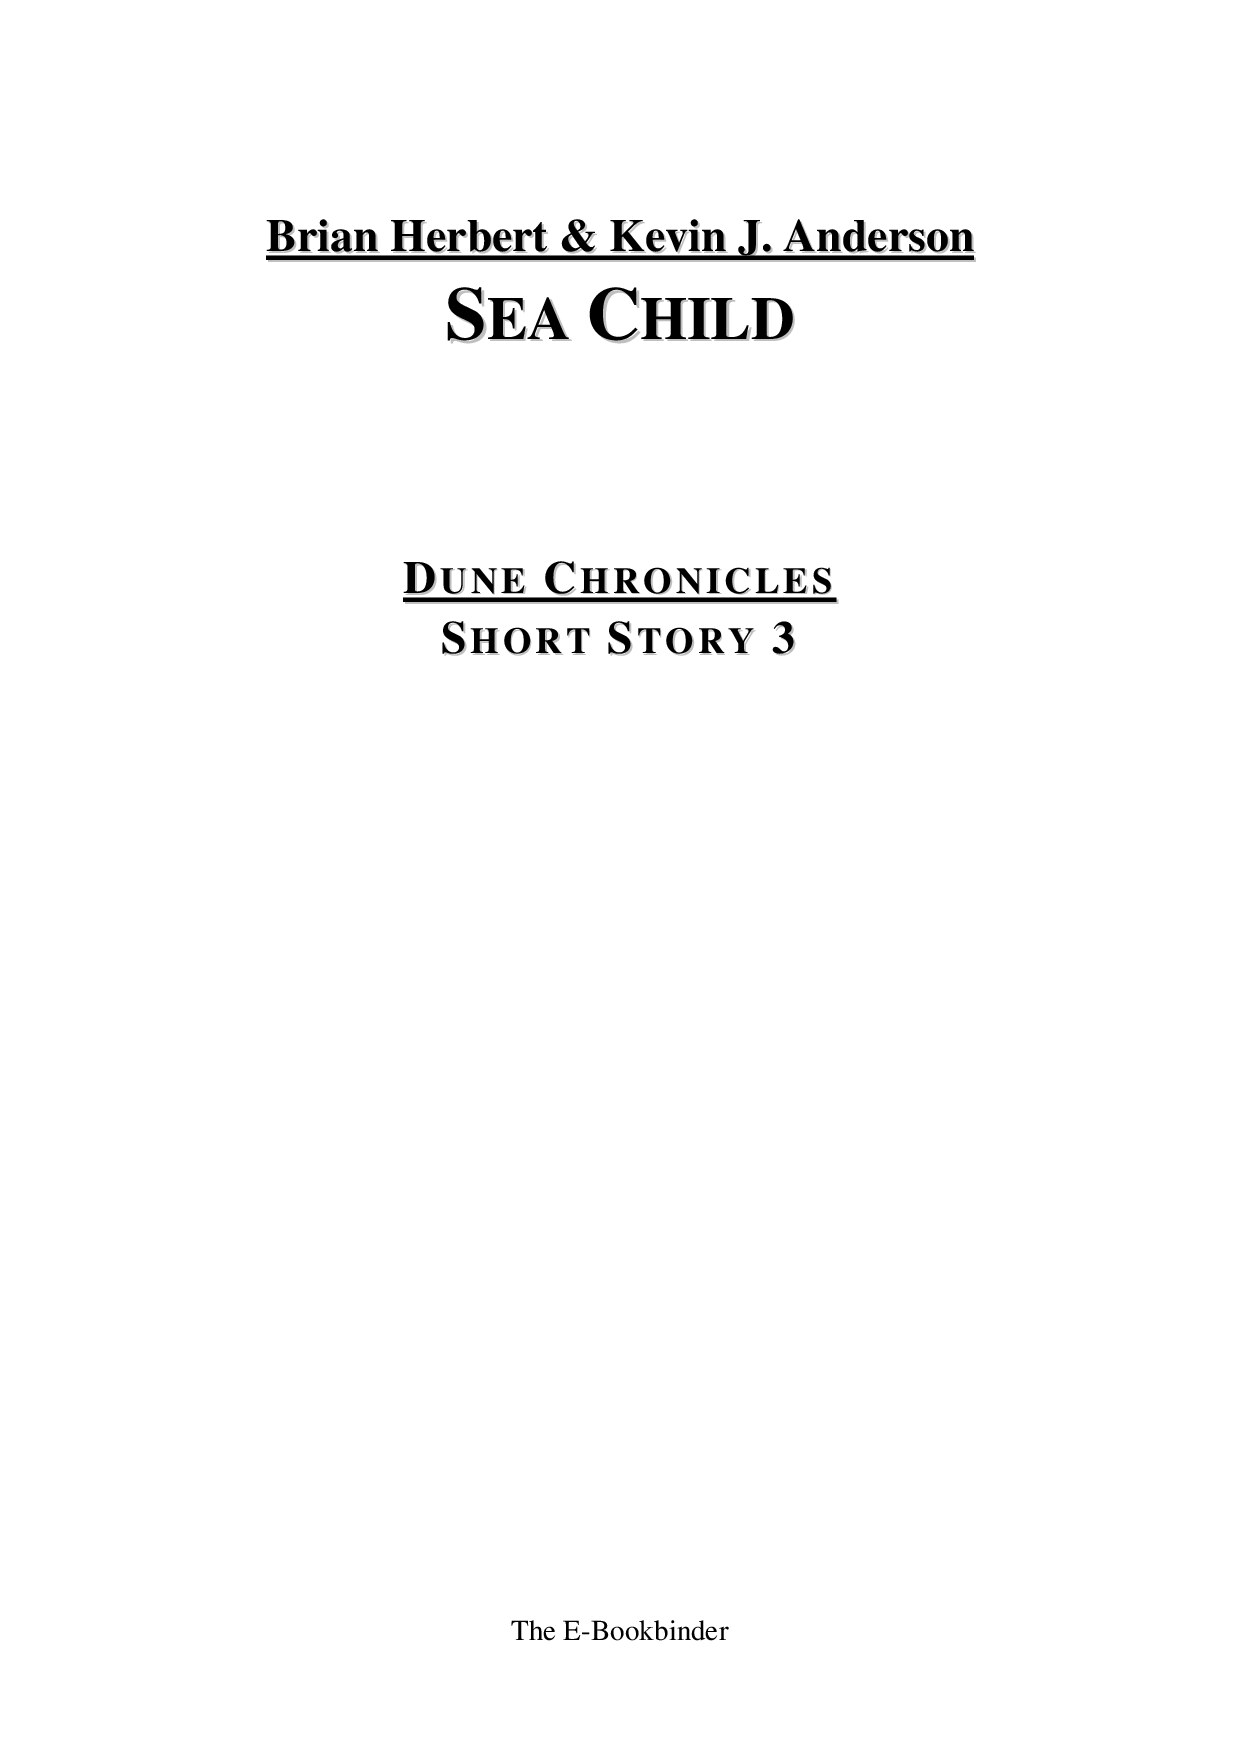 Brian Herbert & Kevin J. Anderson - Dune Chronicles SS 03 - Sea Child